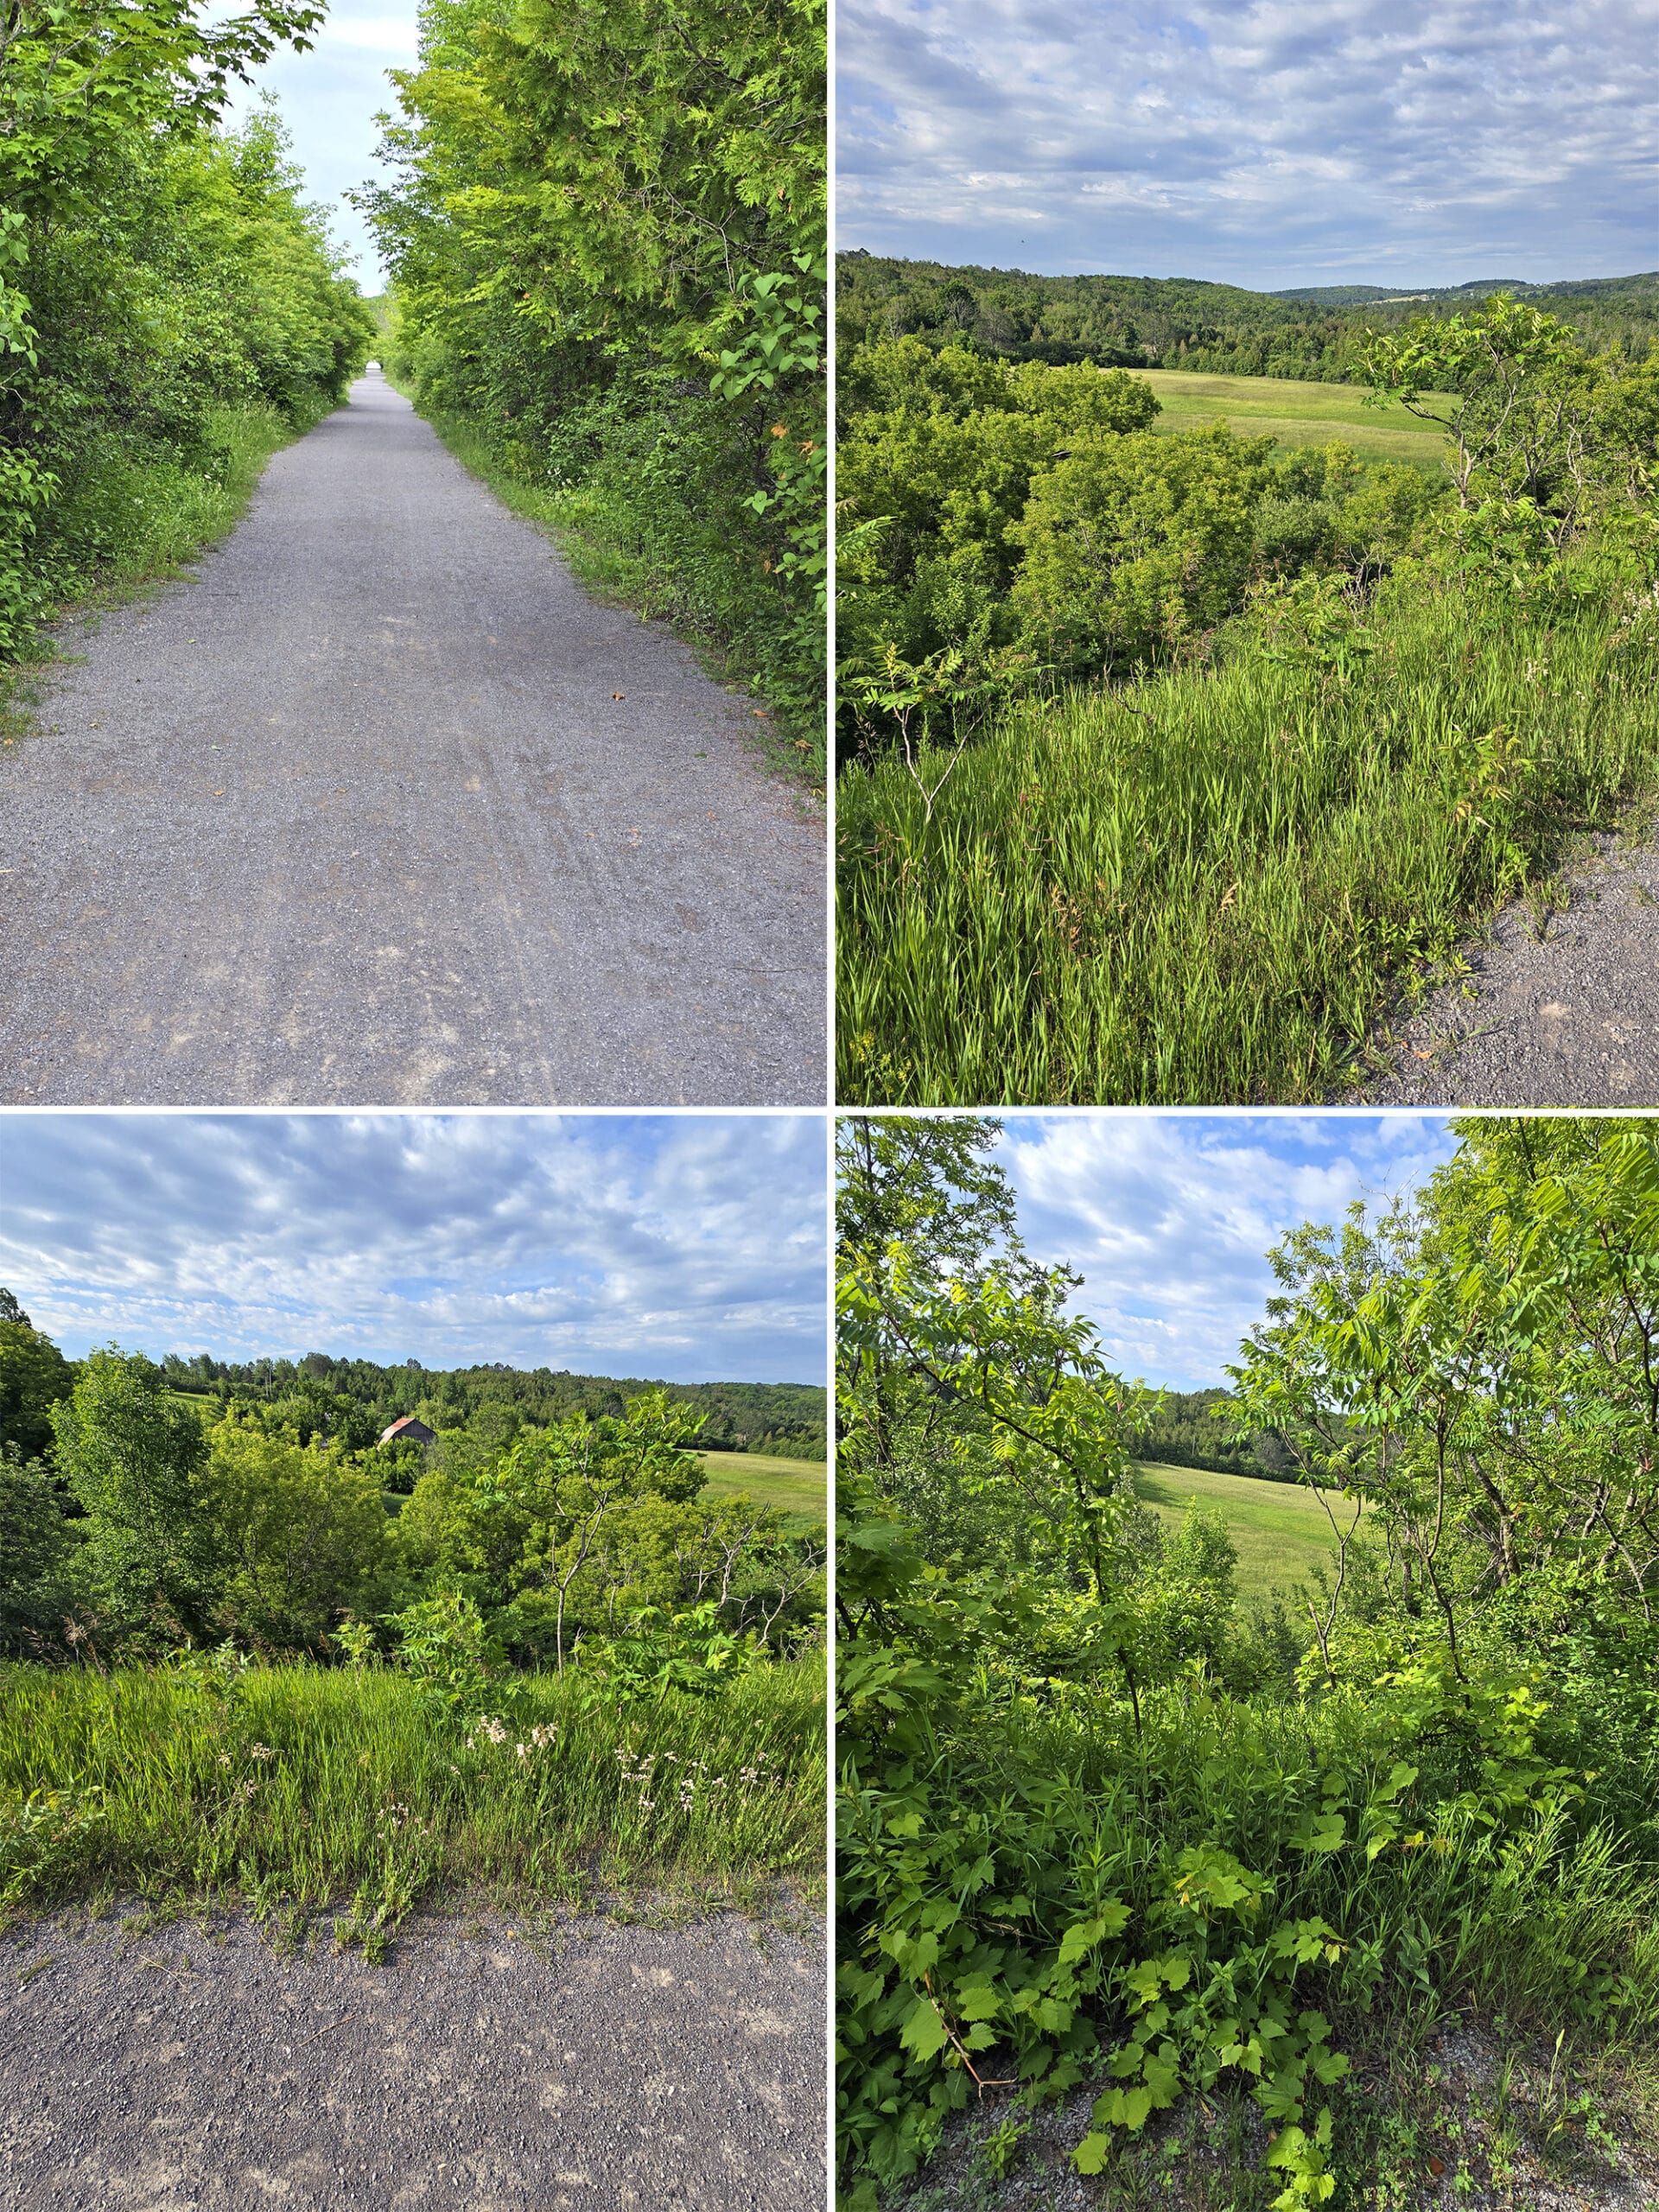 4 part image showing a flat limestone path going though farmland.